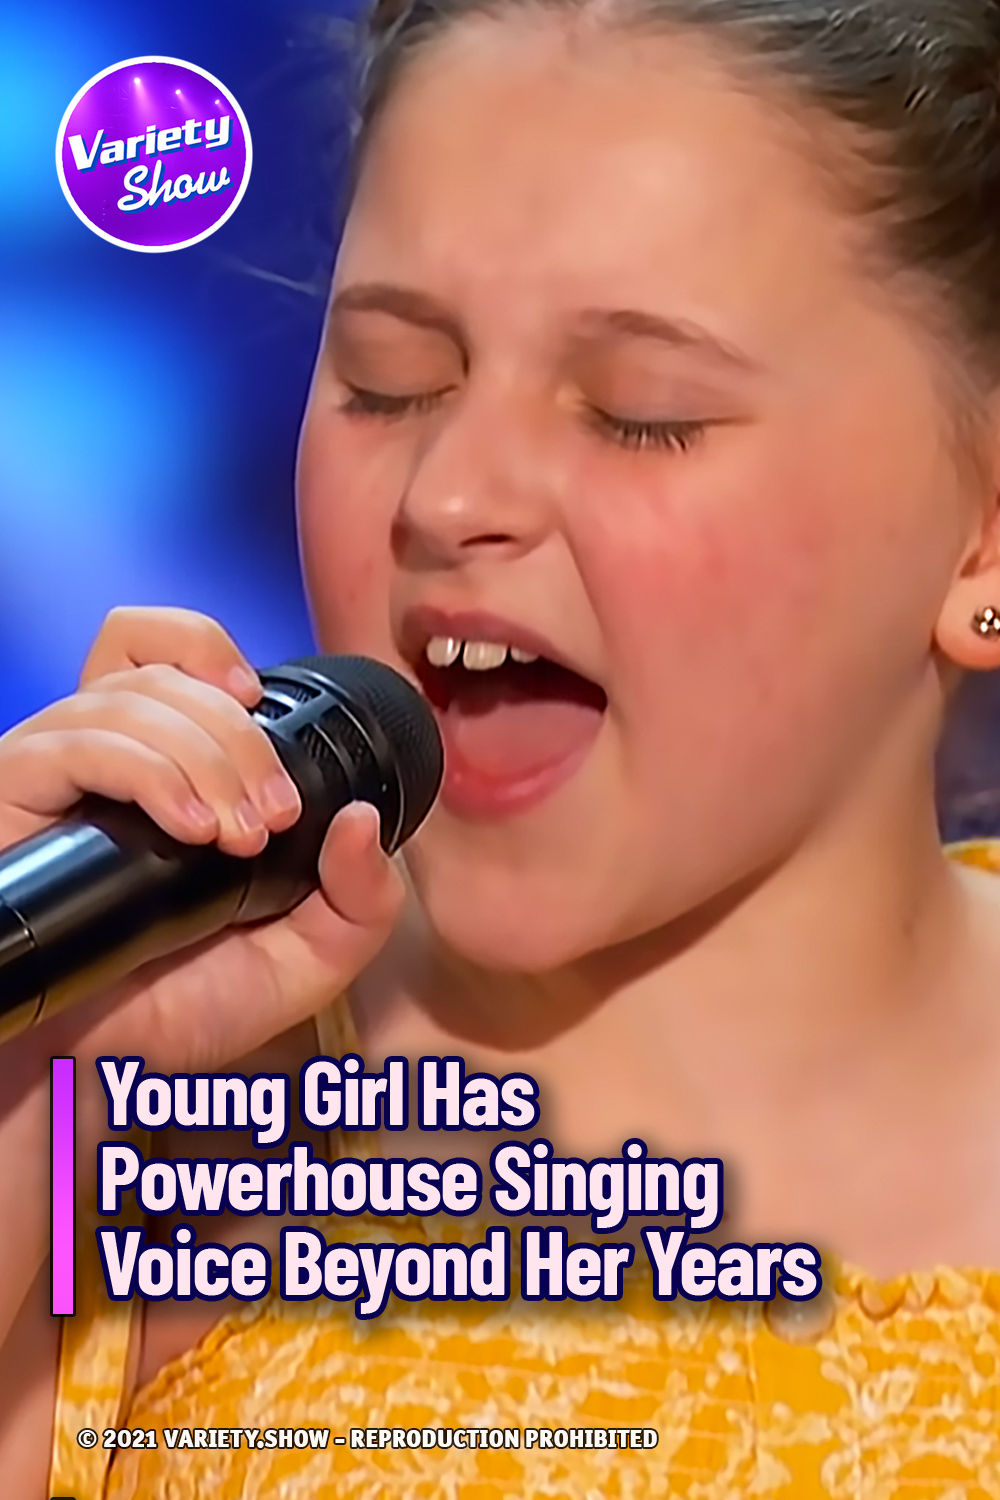 Young Girl Has Powerhouse Singing Voice Beyond Her Years